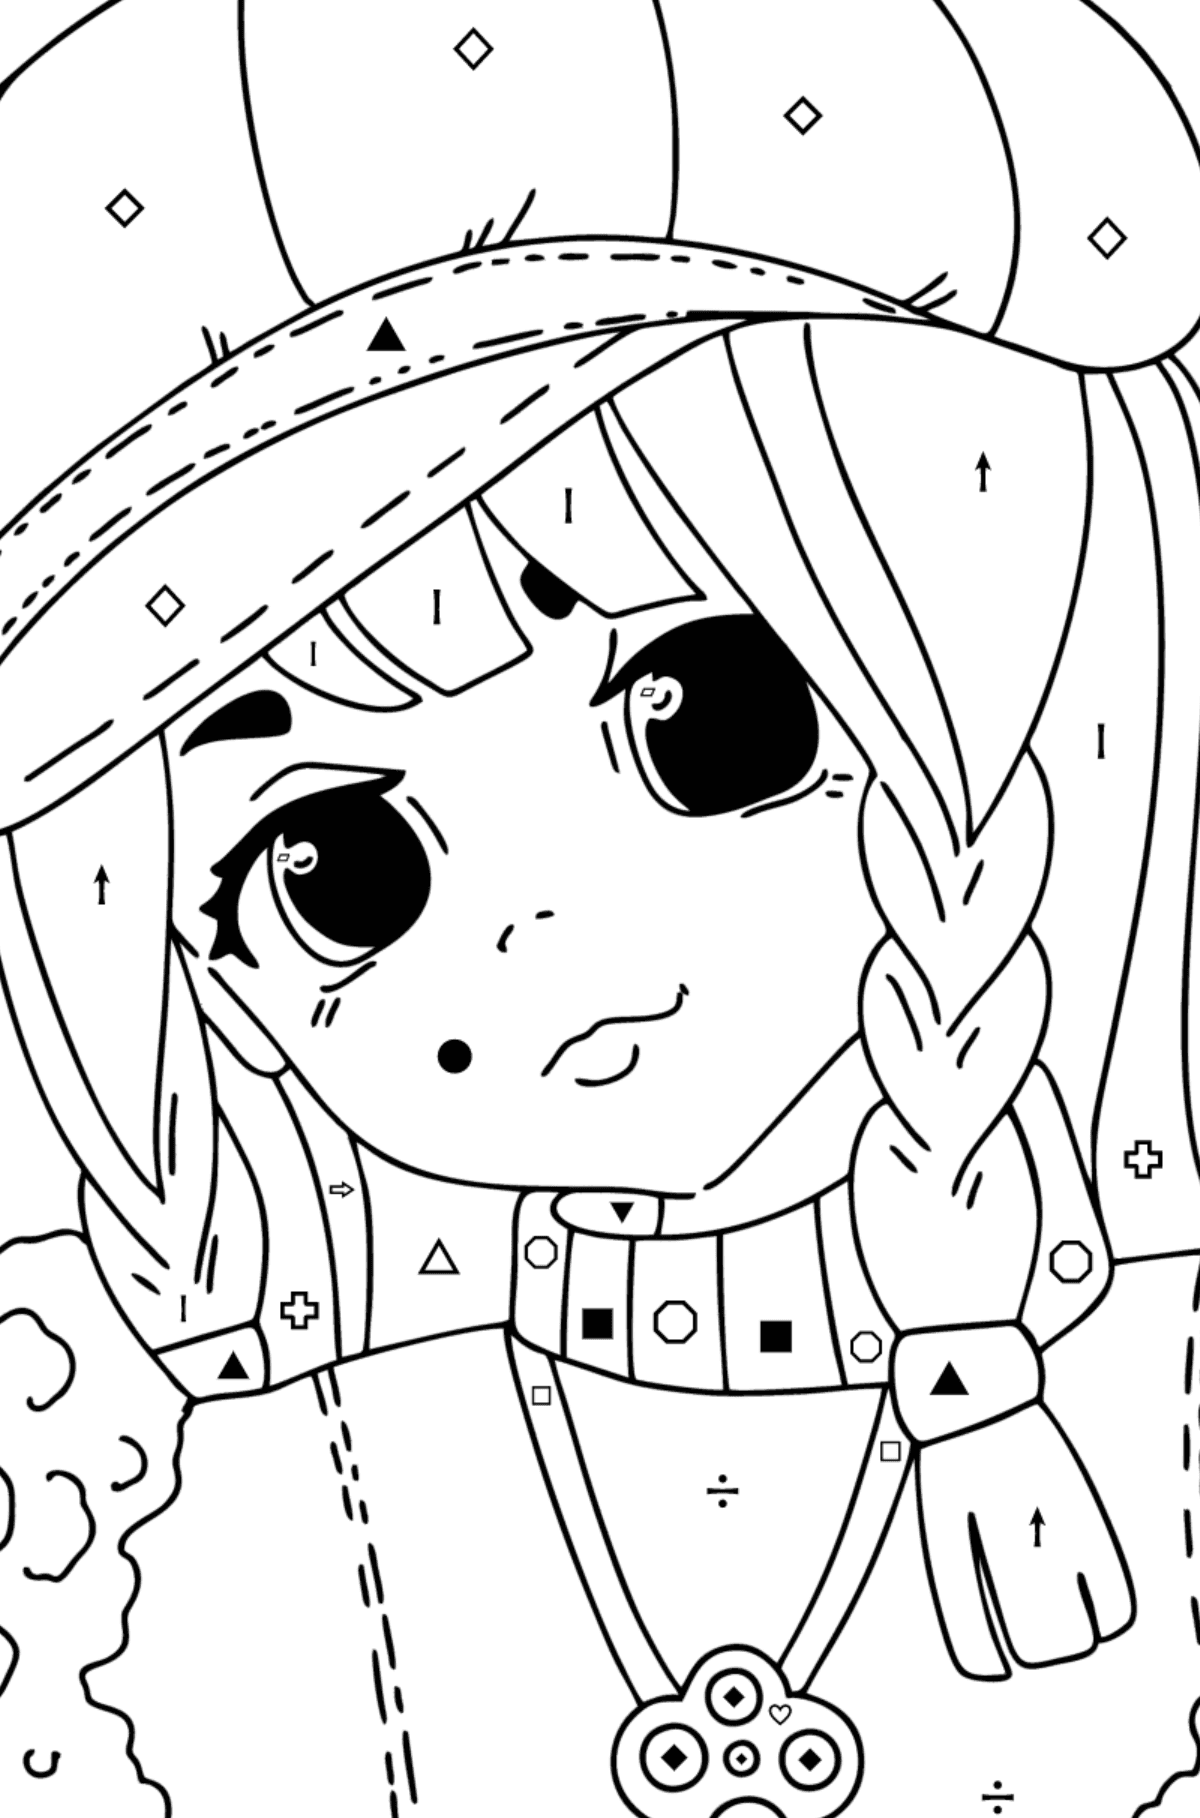 Portrait of a teen girl coloring page - Coloring by Symbols and Geometric Shapes for Kids